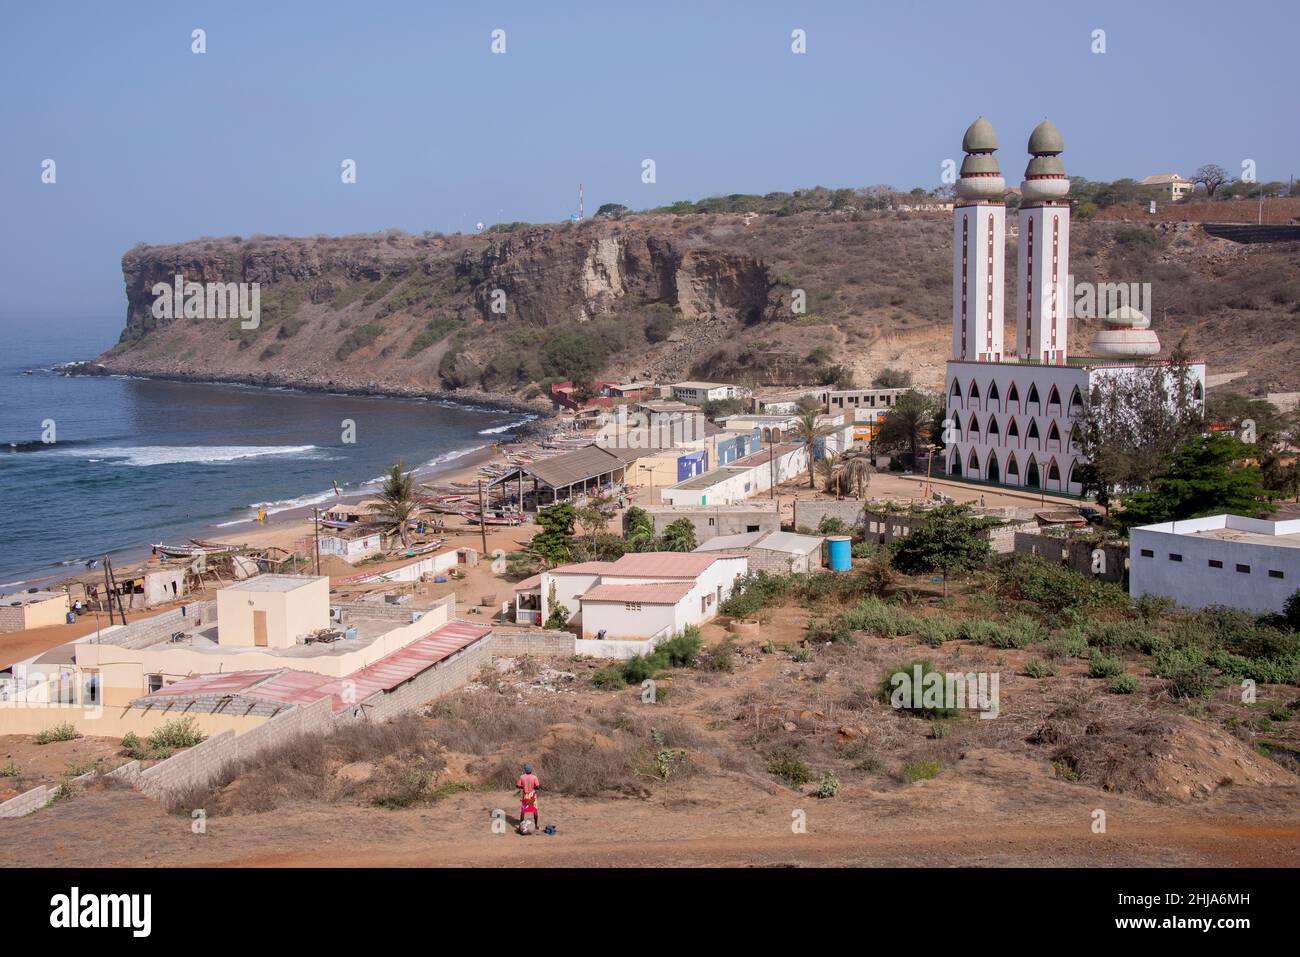 Ouakam village and Divinity Mosque on the coast of Dakar, Senegal Stock Photo